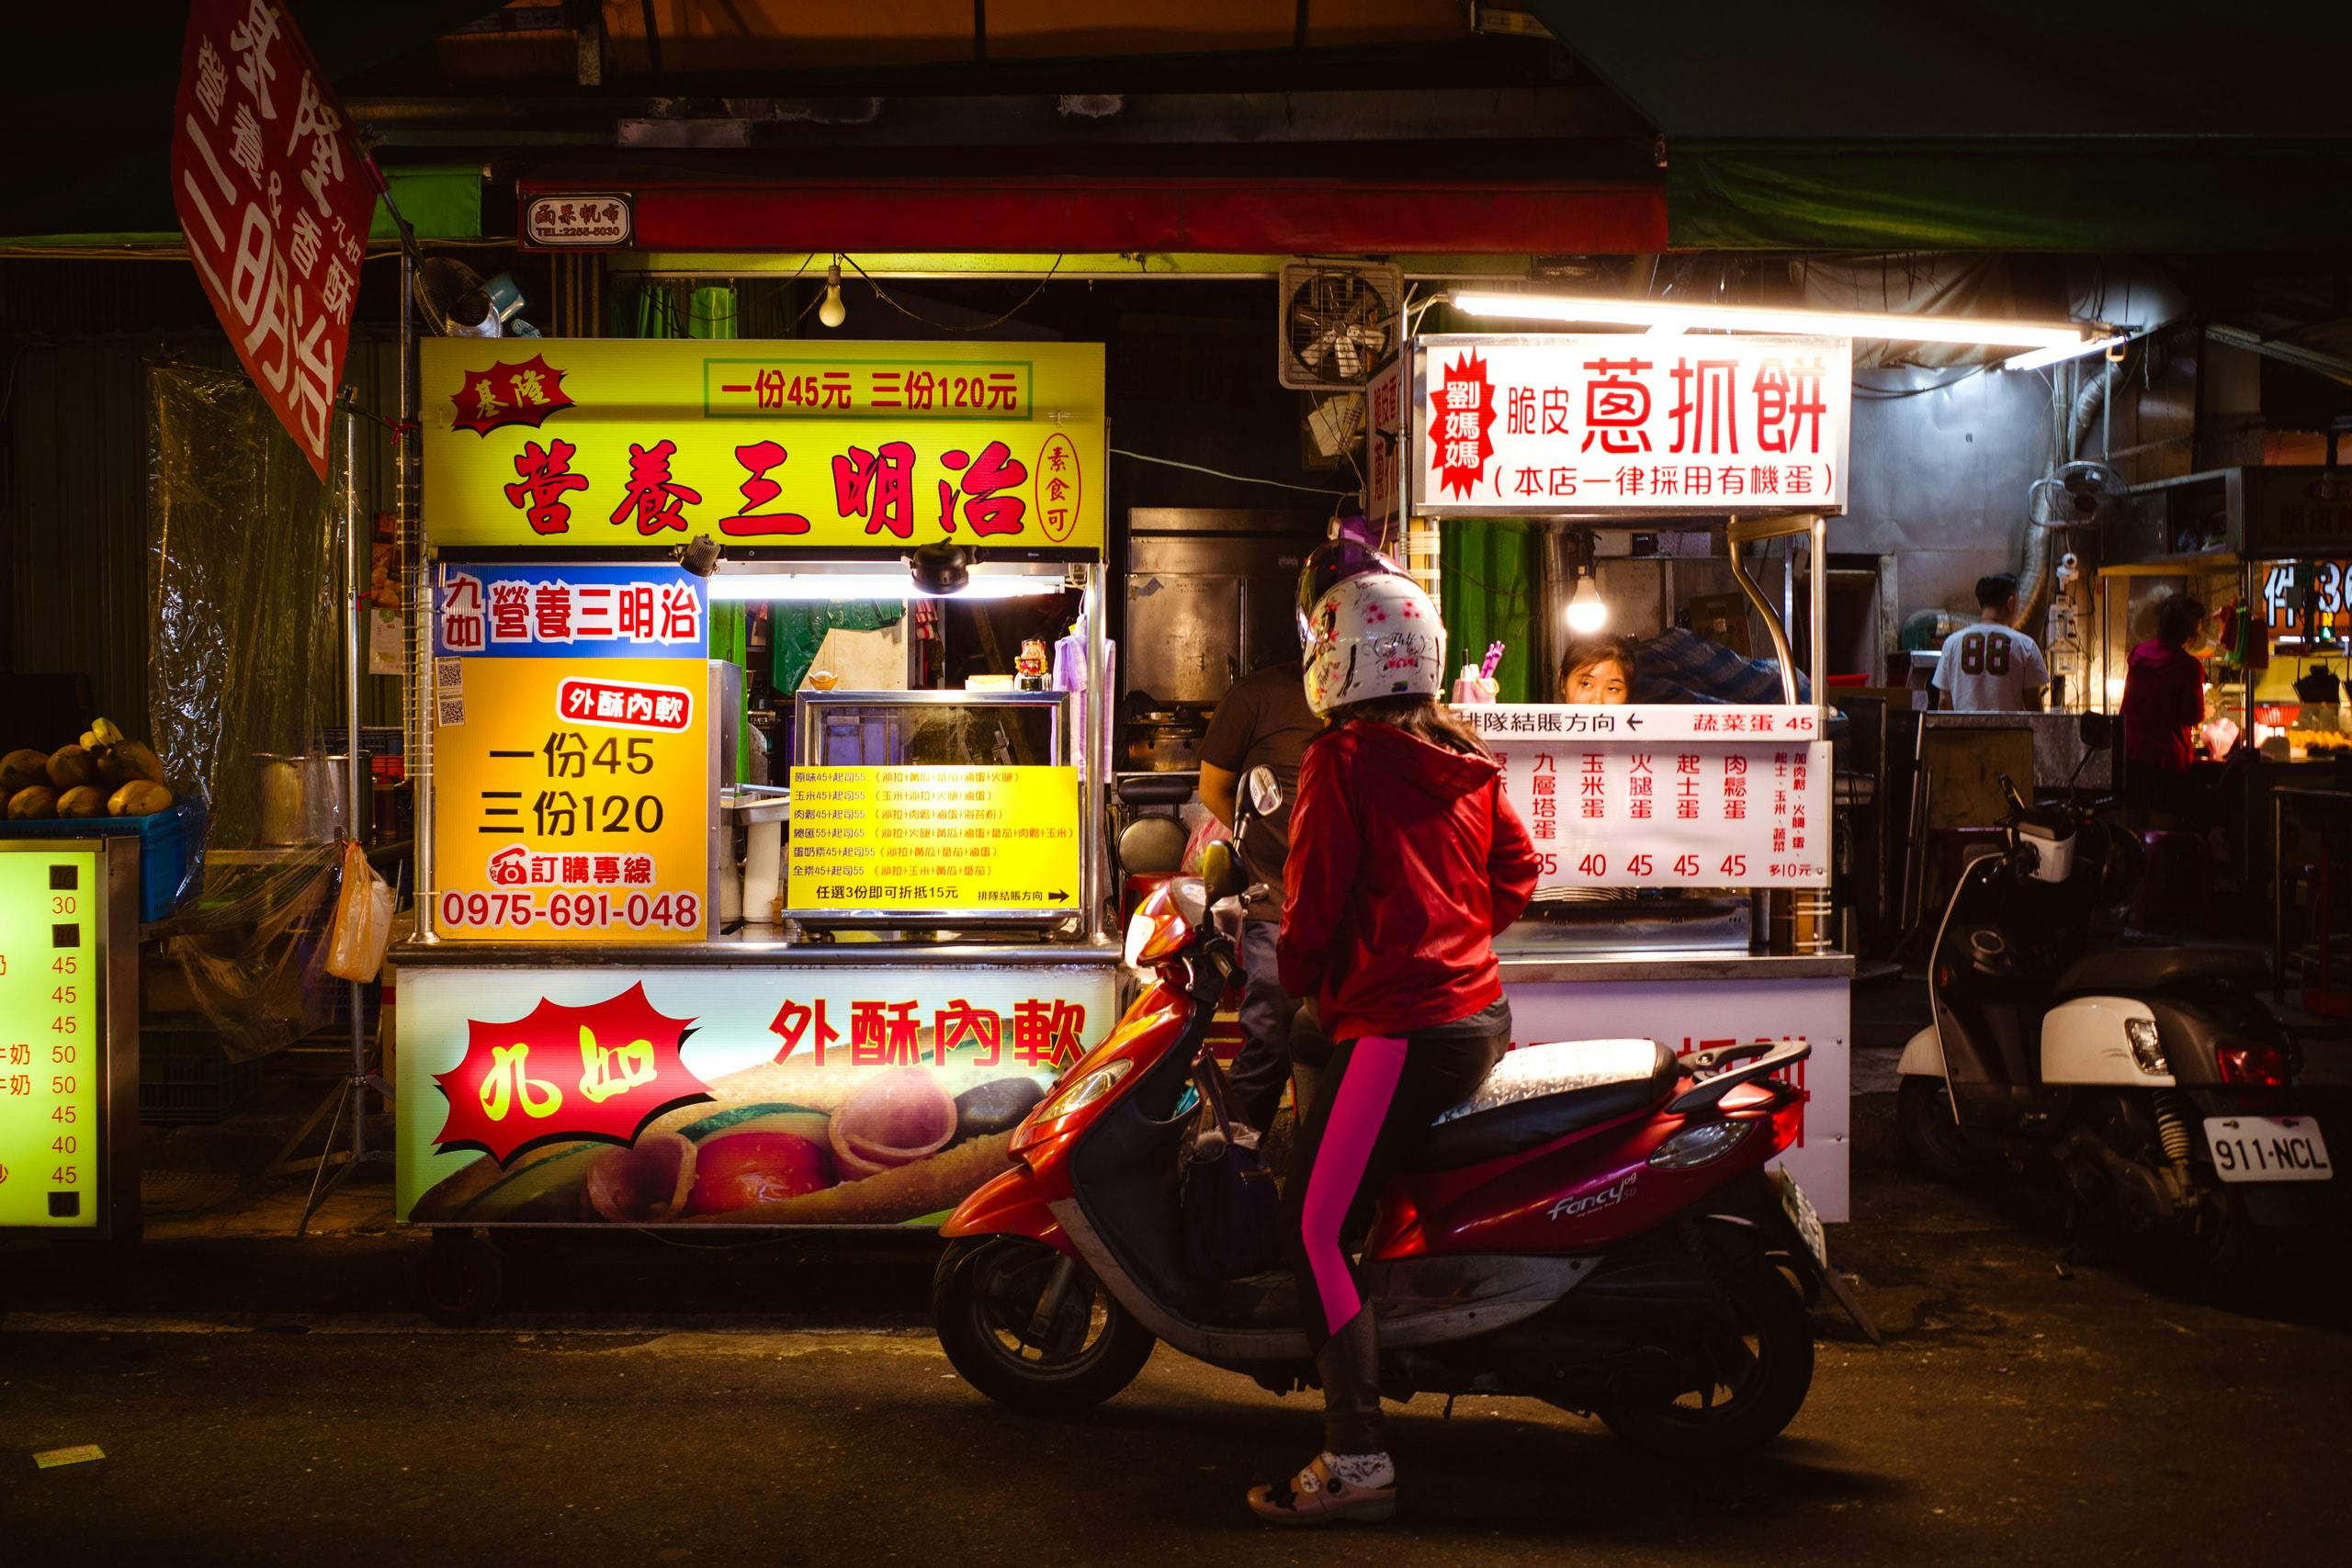 A person on a scooter in front of a food stand